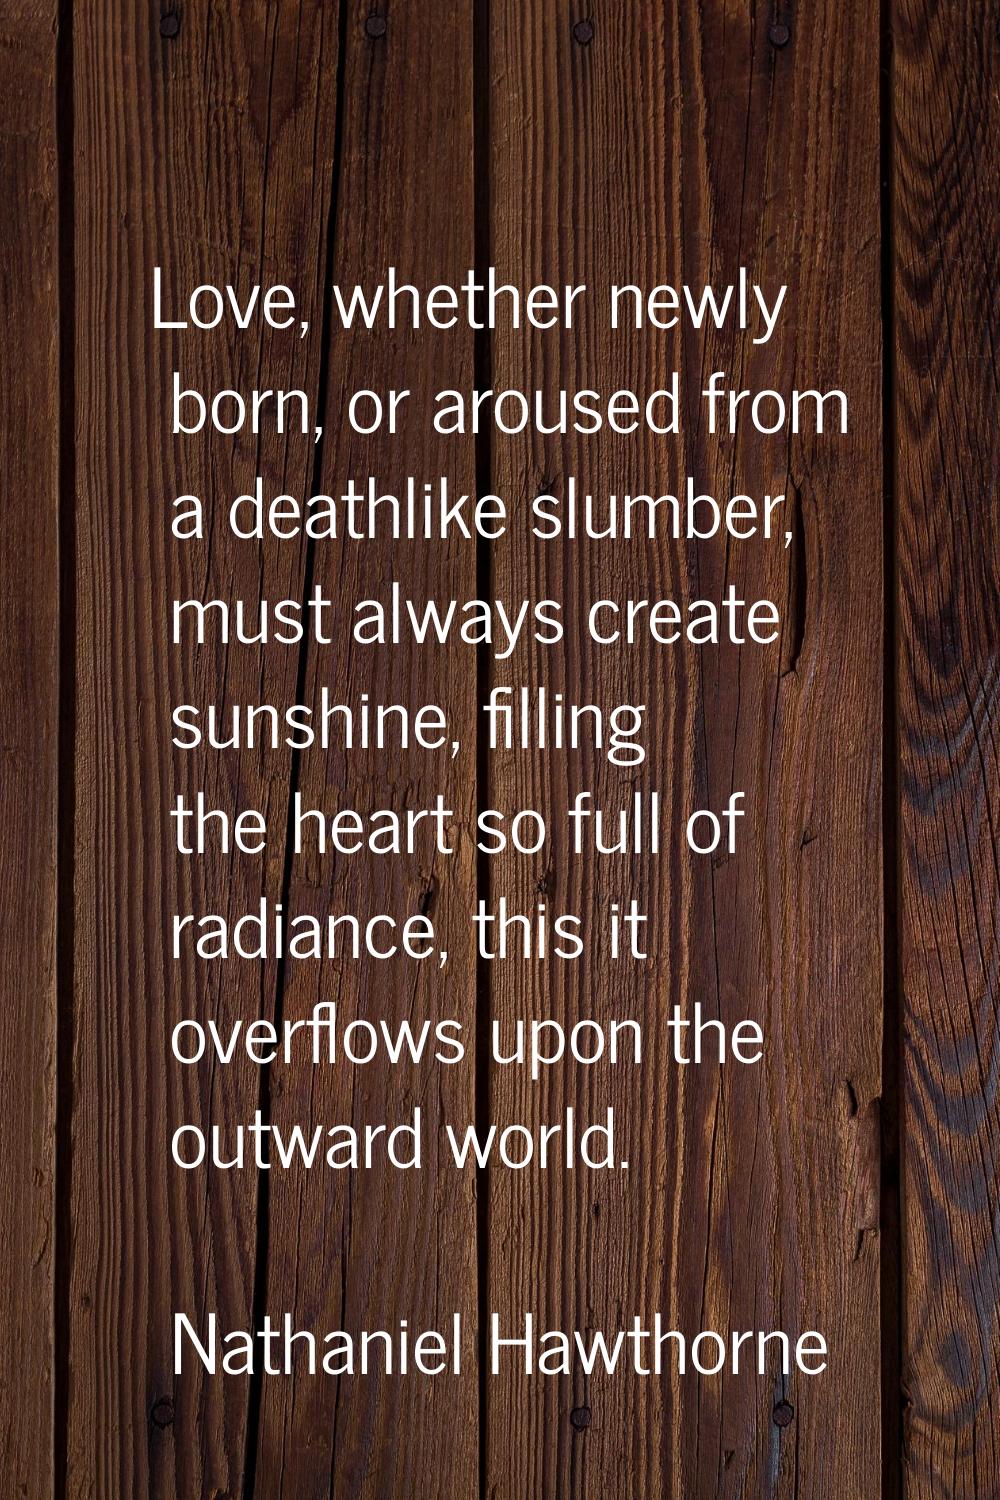 Love, whether newly born, or aroused from a deathlike slumber, must always create sunshine, filling